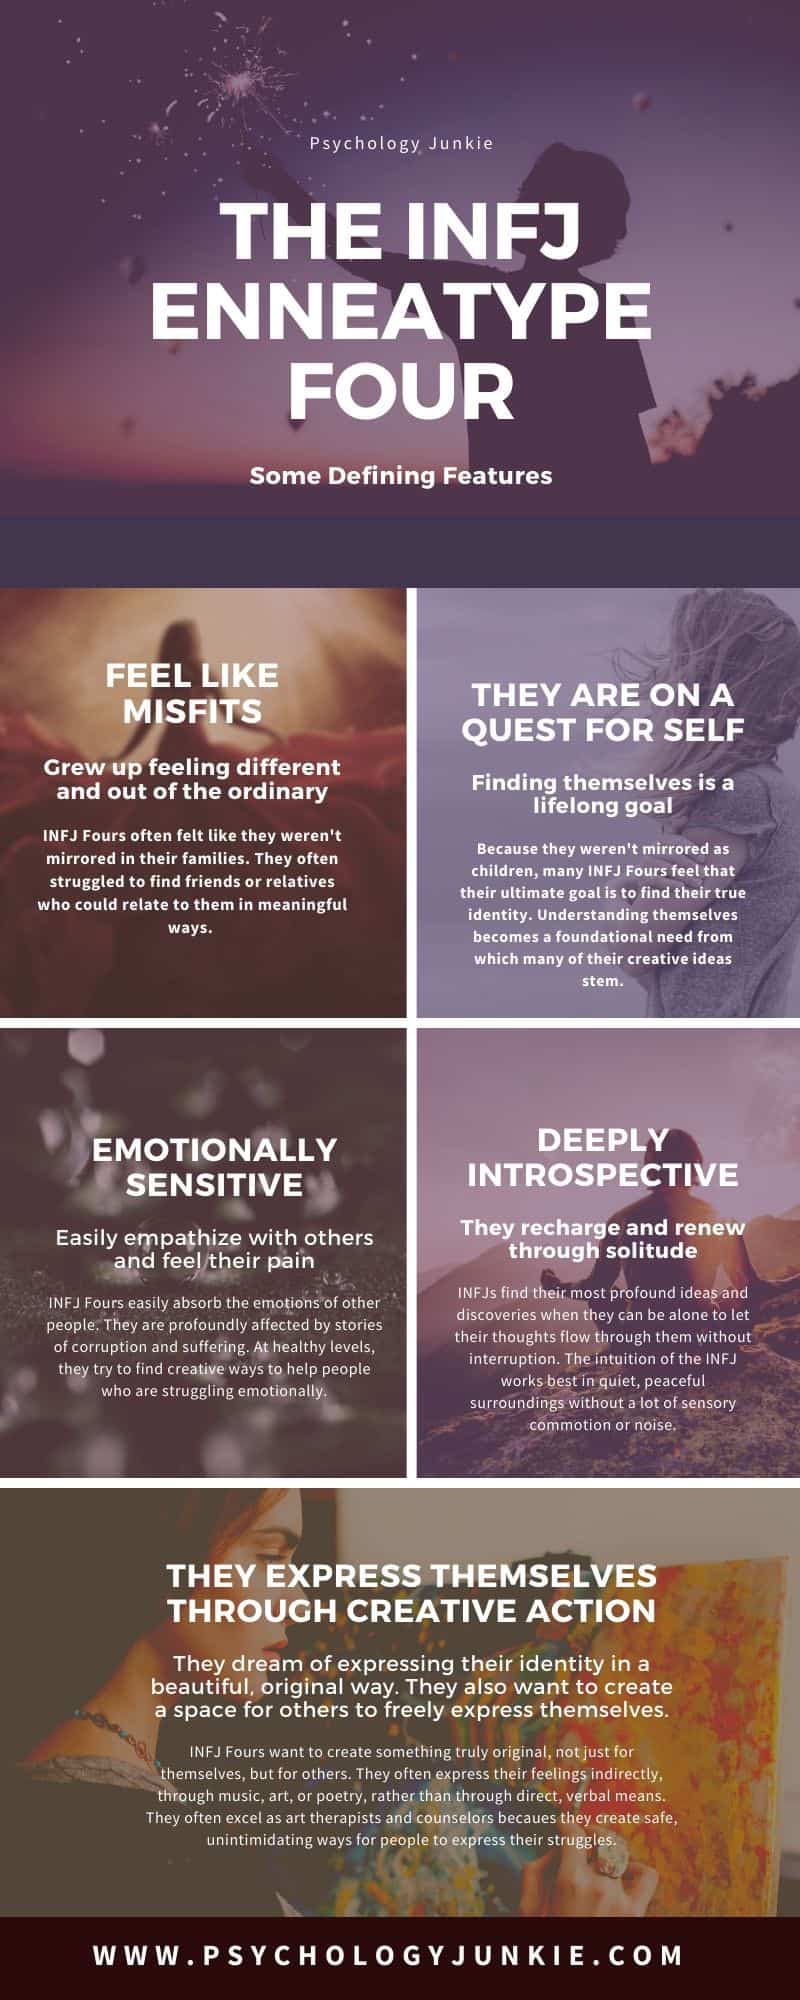 Get an in-depth look at what it's like to be an INFJ as well as a Four in the Enneagram system. #INFJ #Enneagram #Personality